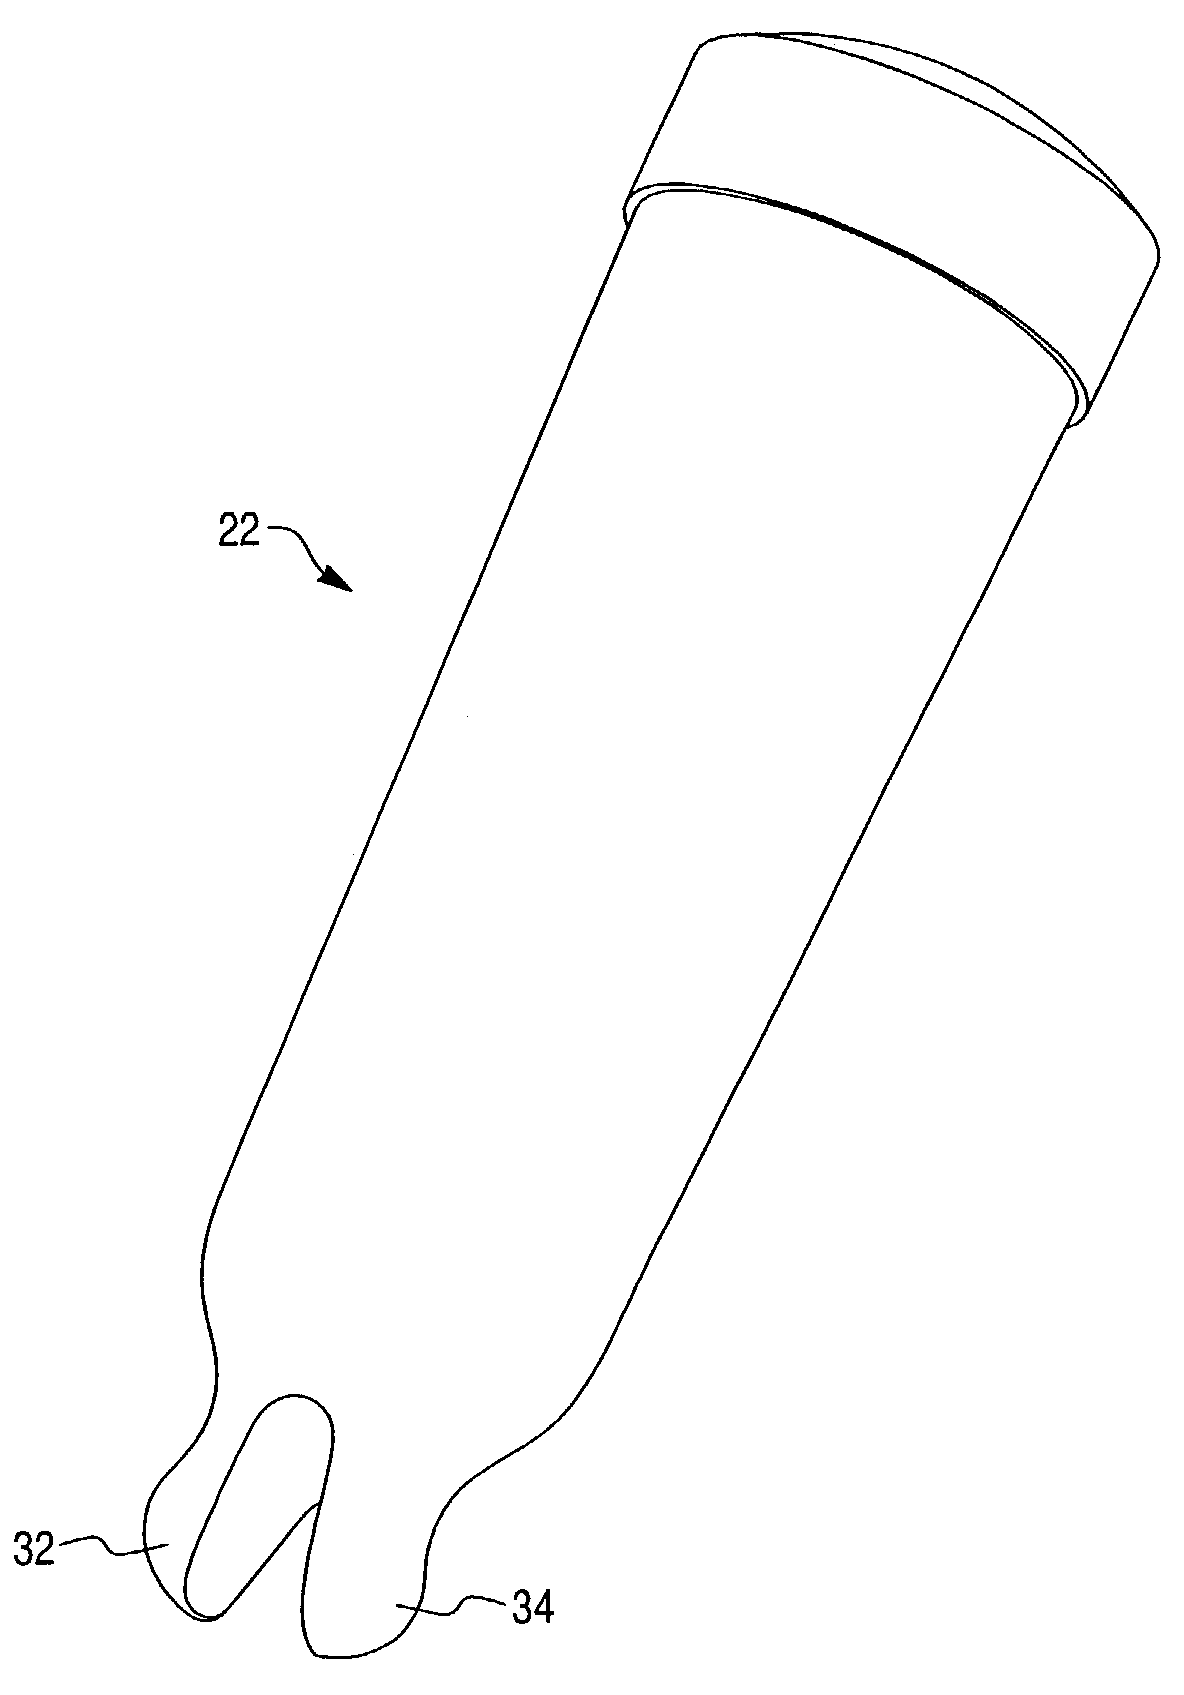 Apparatus for automated storage and retrieval of miniature shelf keeping units